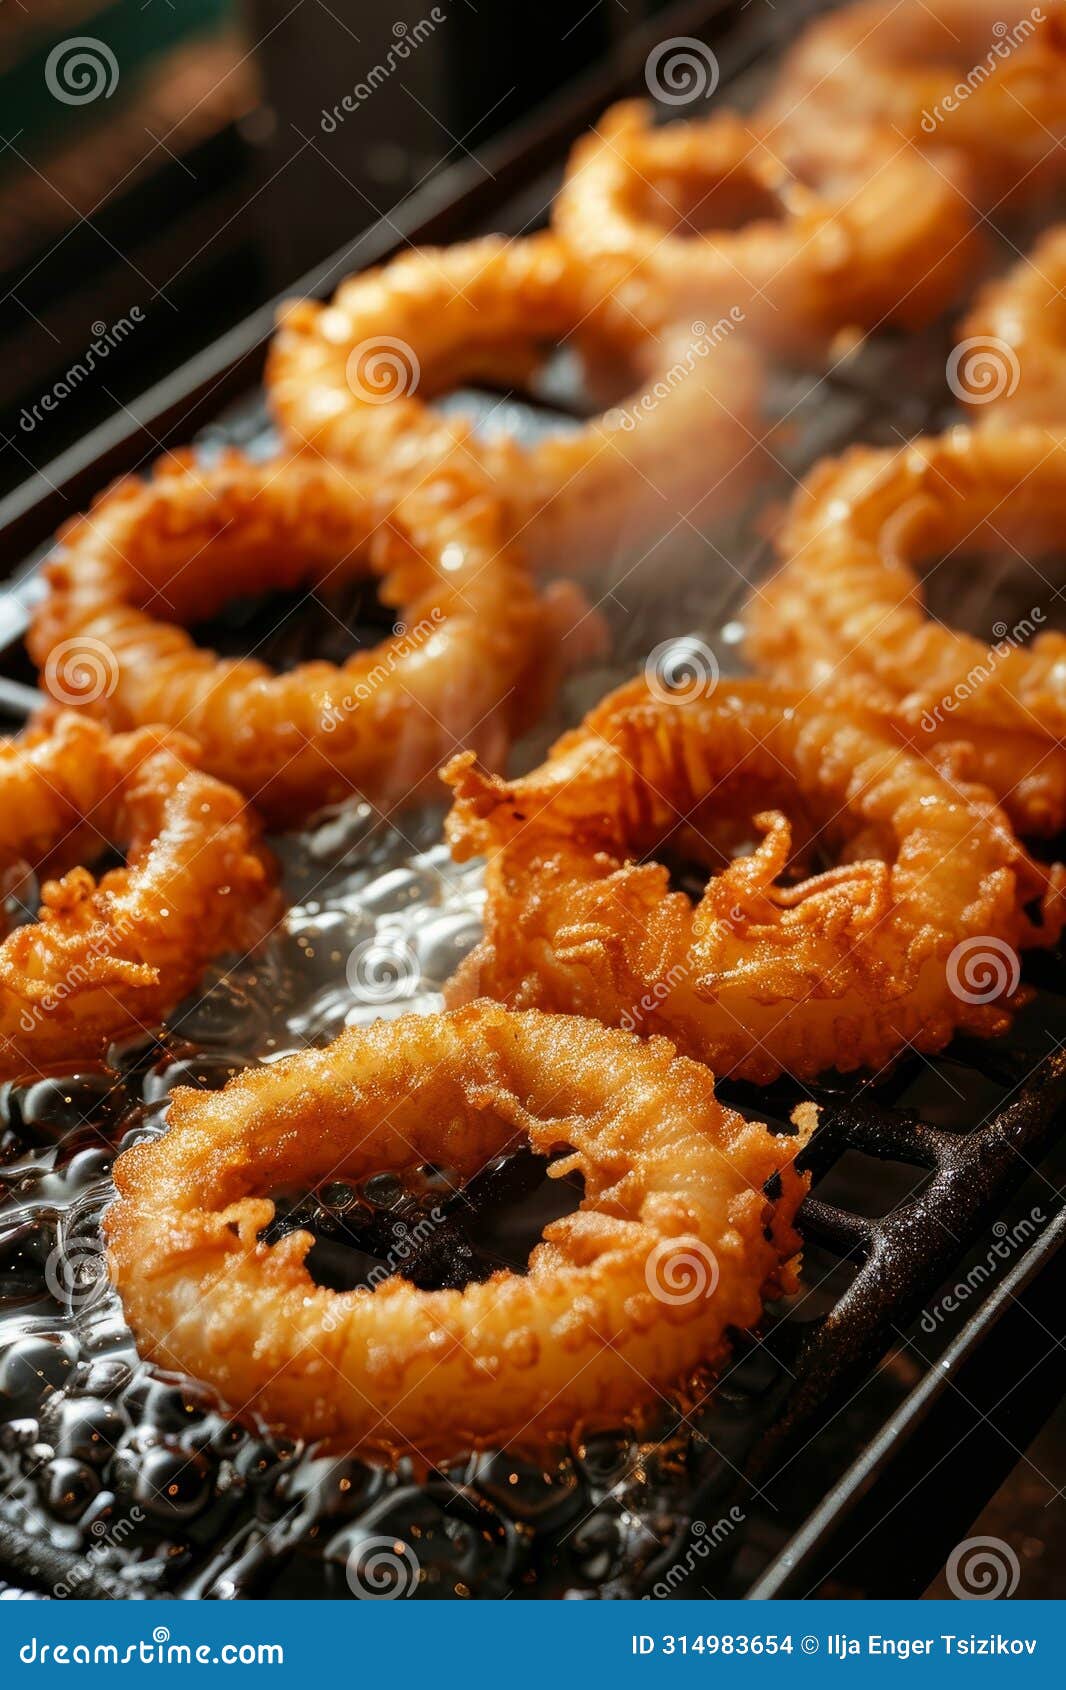 deliciously fried calamari rings golden, crispy, and tender perfection achieved in oil